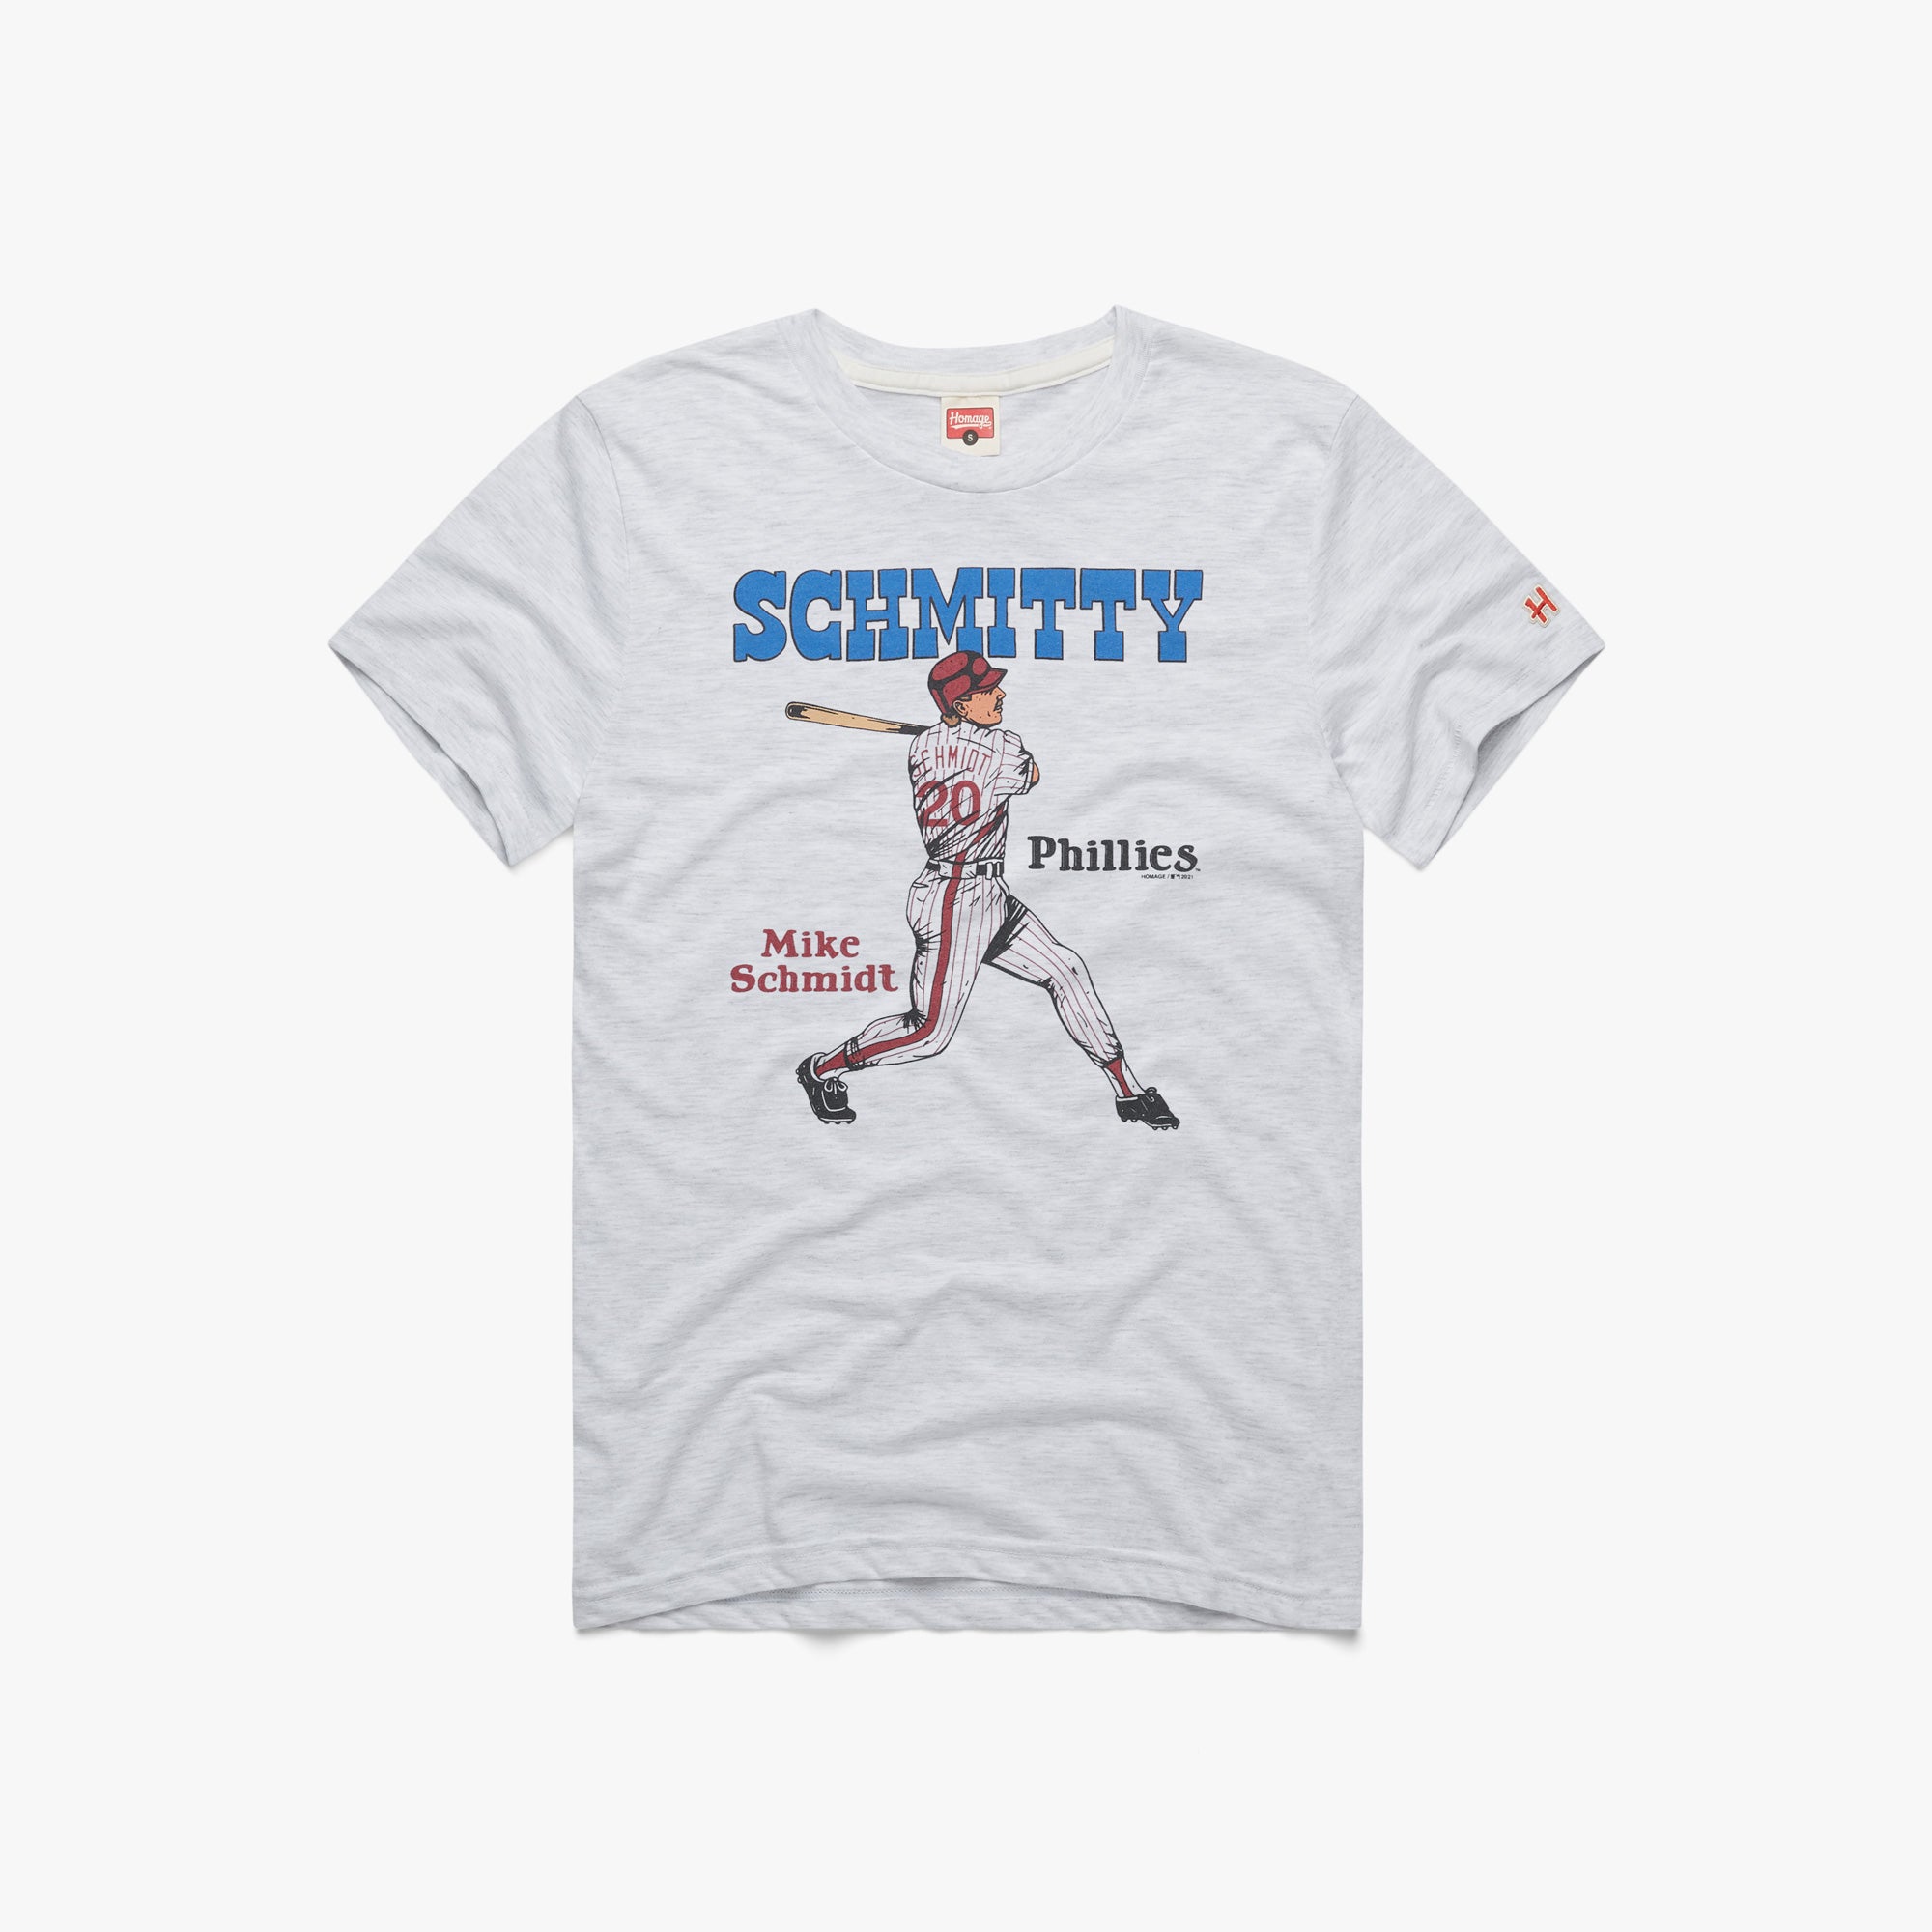 Mike Schmidt Phillies Home Run T-Shirt from Homage. | Ash | Vintage Apparel from Homage.